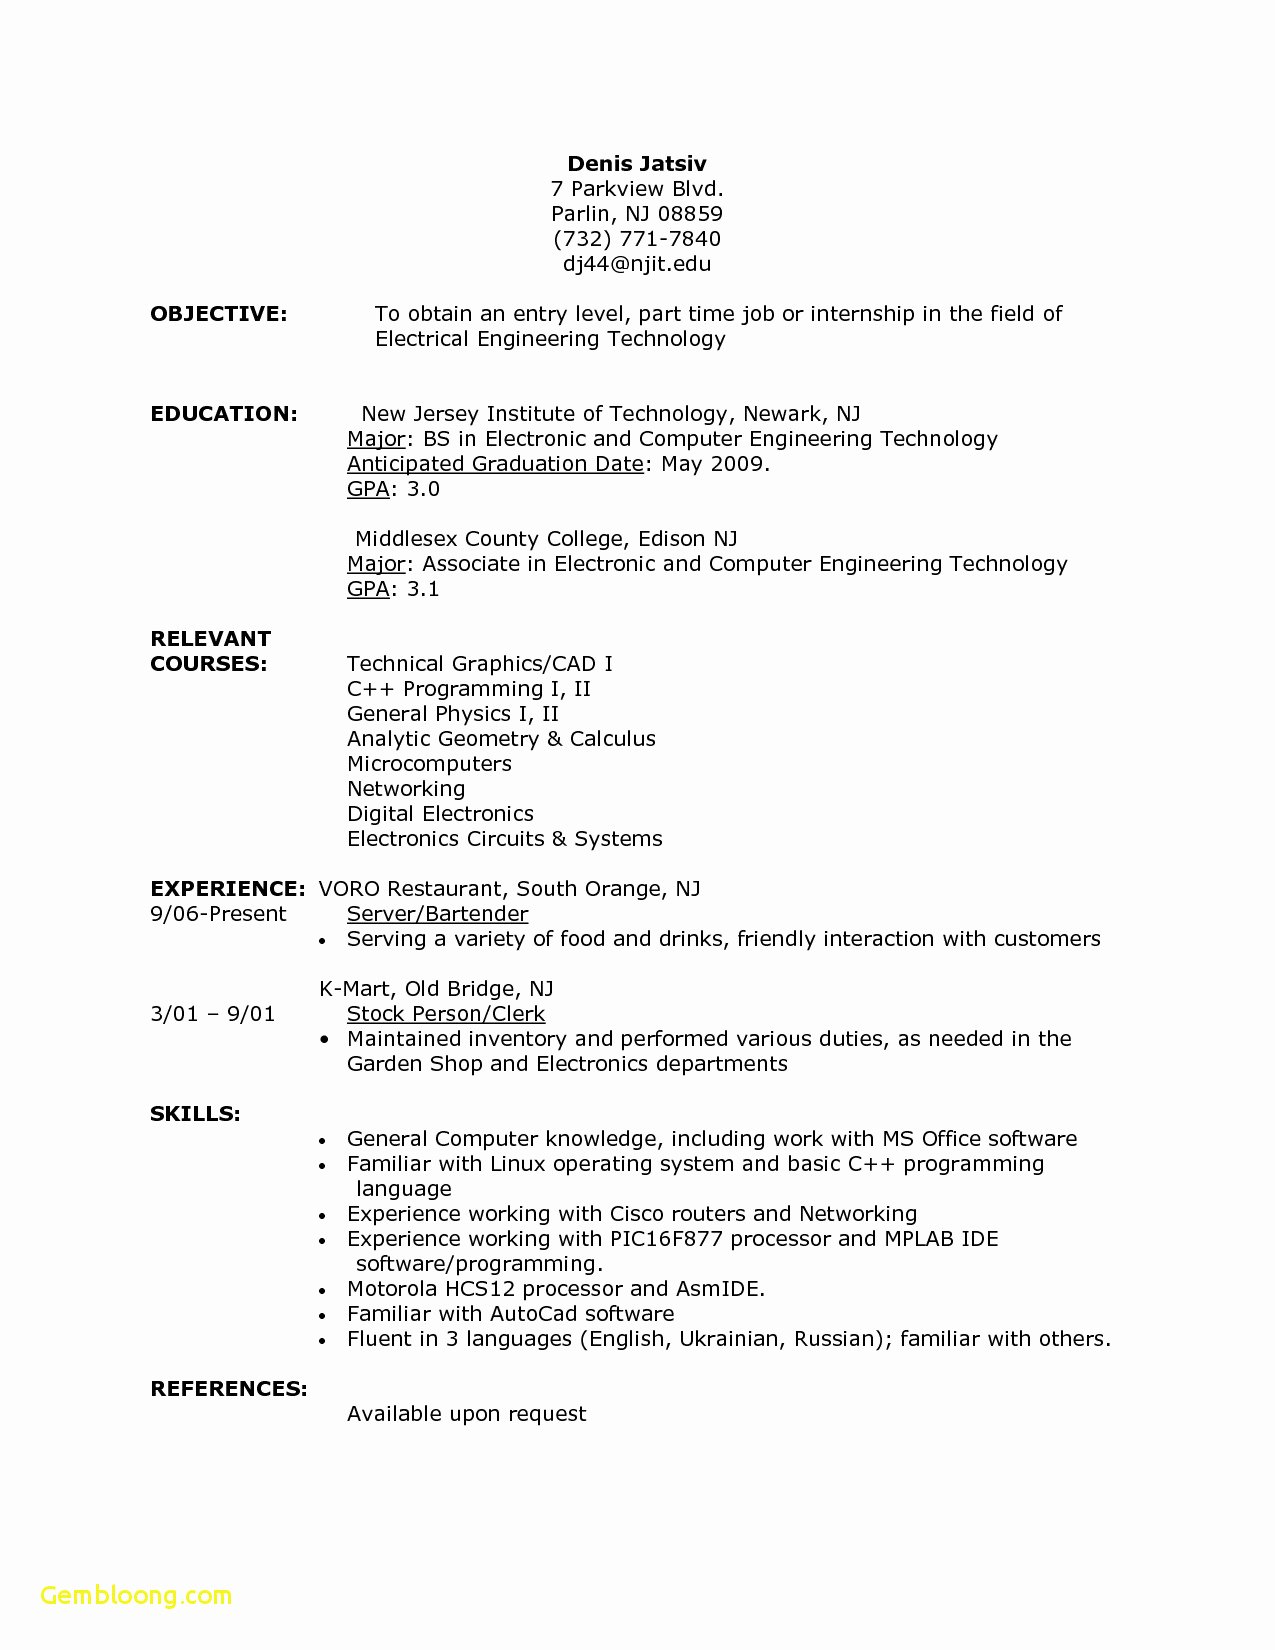 Sample Resume for College Student as Resume Writing Resume